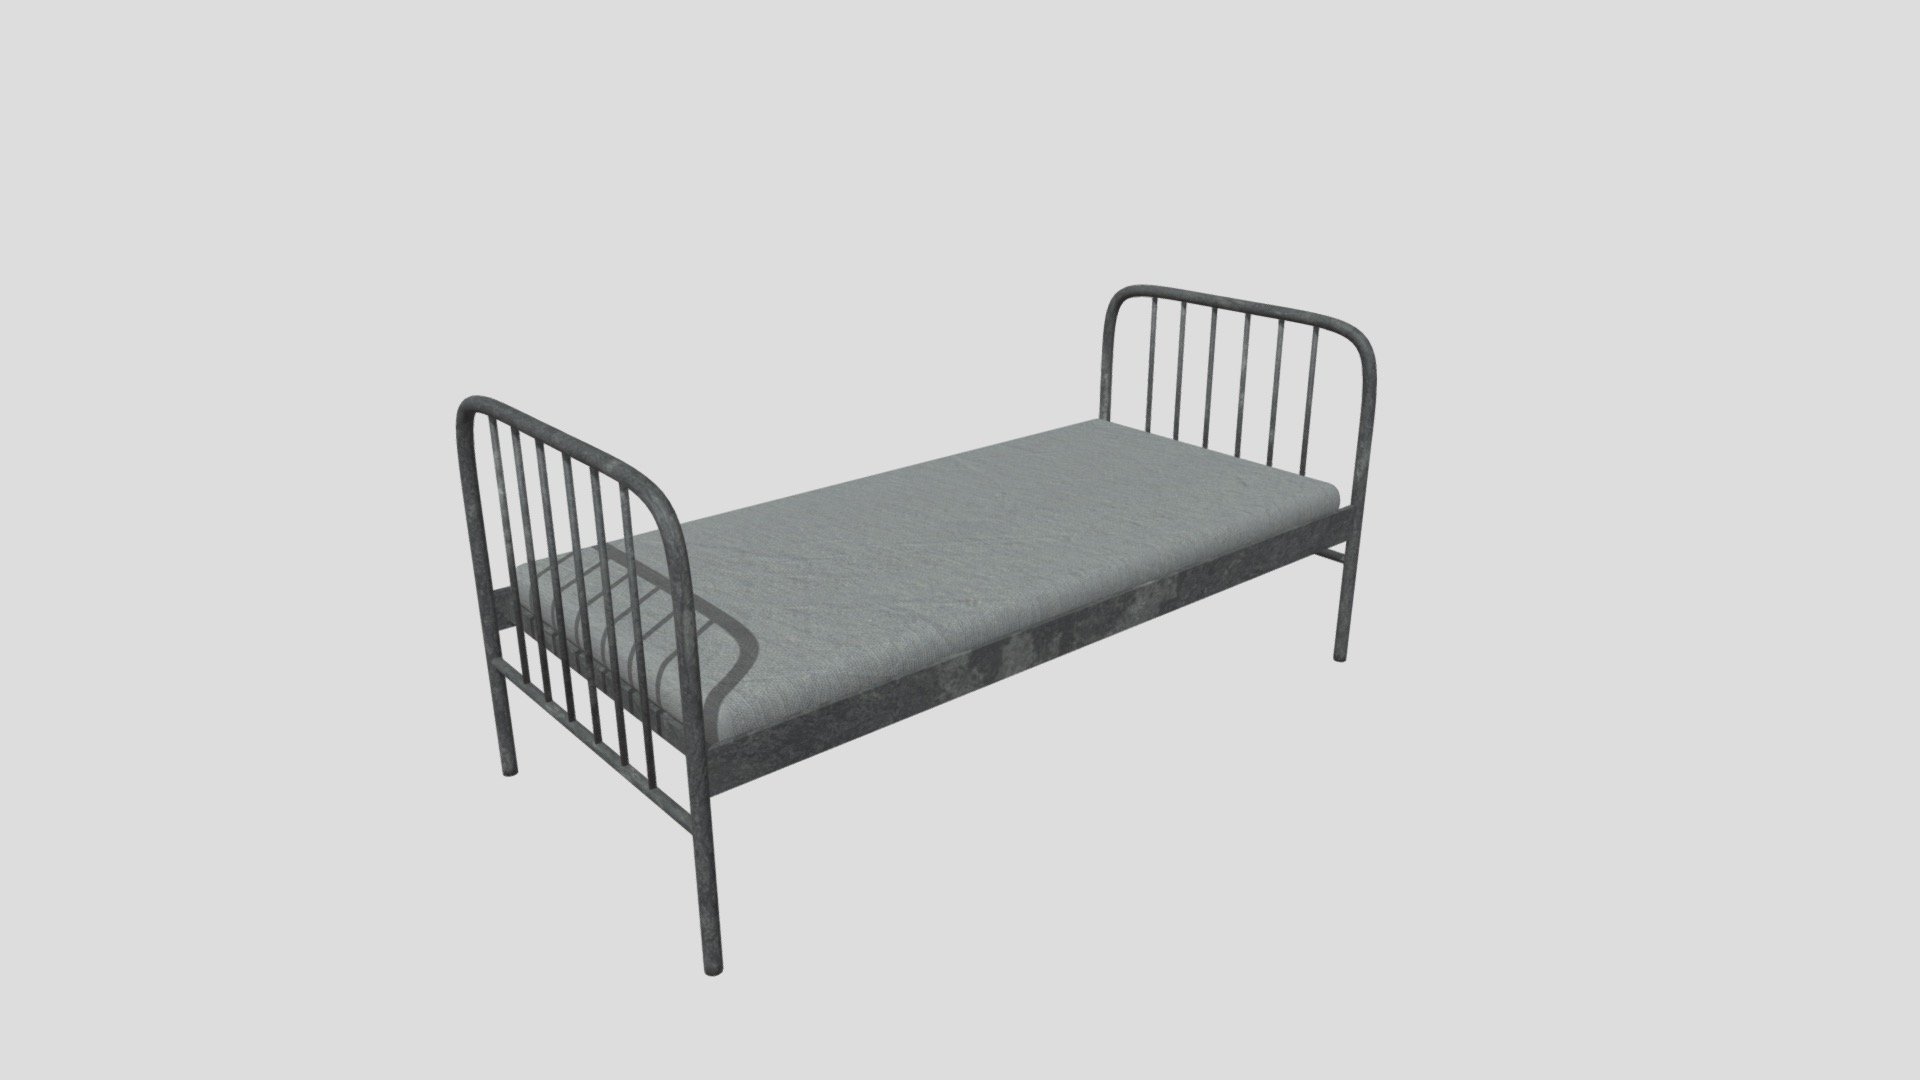 Textures: 2048 x 2048, Two colors on texture: Grey and light grey colors.

Has Normal Map: 2048 x 2048.

Materials: 2 - Metal, Mattress.

Smooth shaded.

Mirrored.

Subdivision Level: 0

Origin located on bottom-center.

Polygons: 6612

Vertices: 3368

Formats: Fbx, Obj, Stl, Dae.

I hope you enjoy the model! - Prison Bed - Buy Royalty Free 3D model by ED+ (@EDplus) 3d model